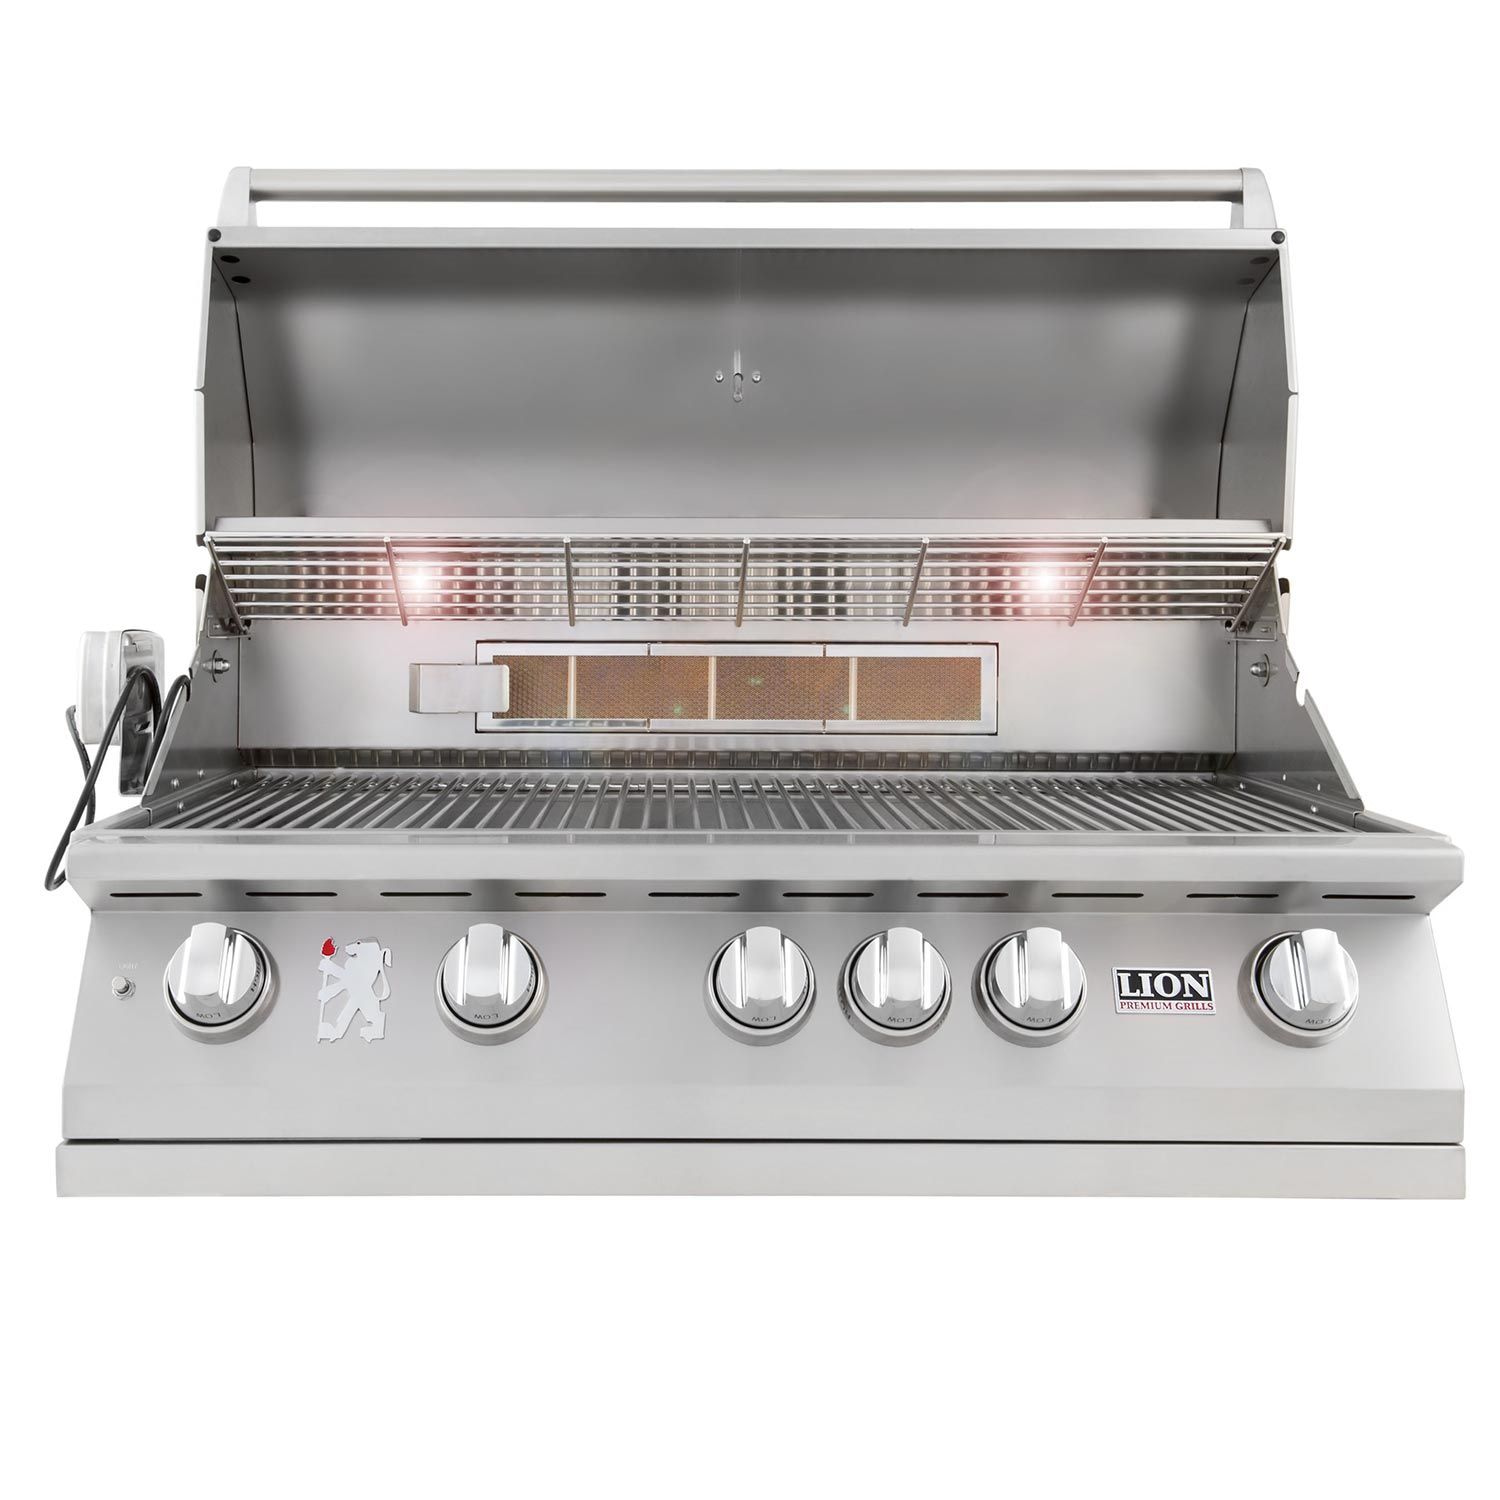 Lion Stainless Steel Grill Searing Burner